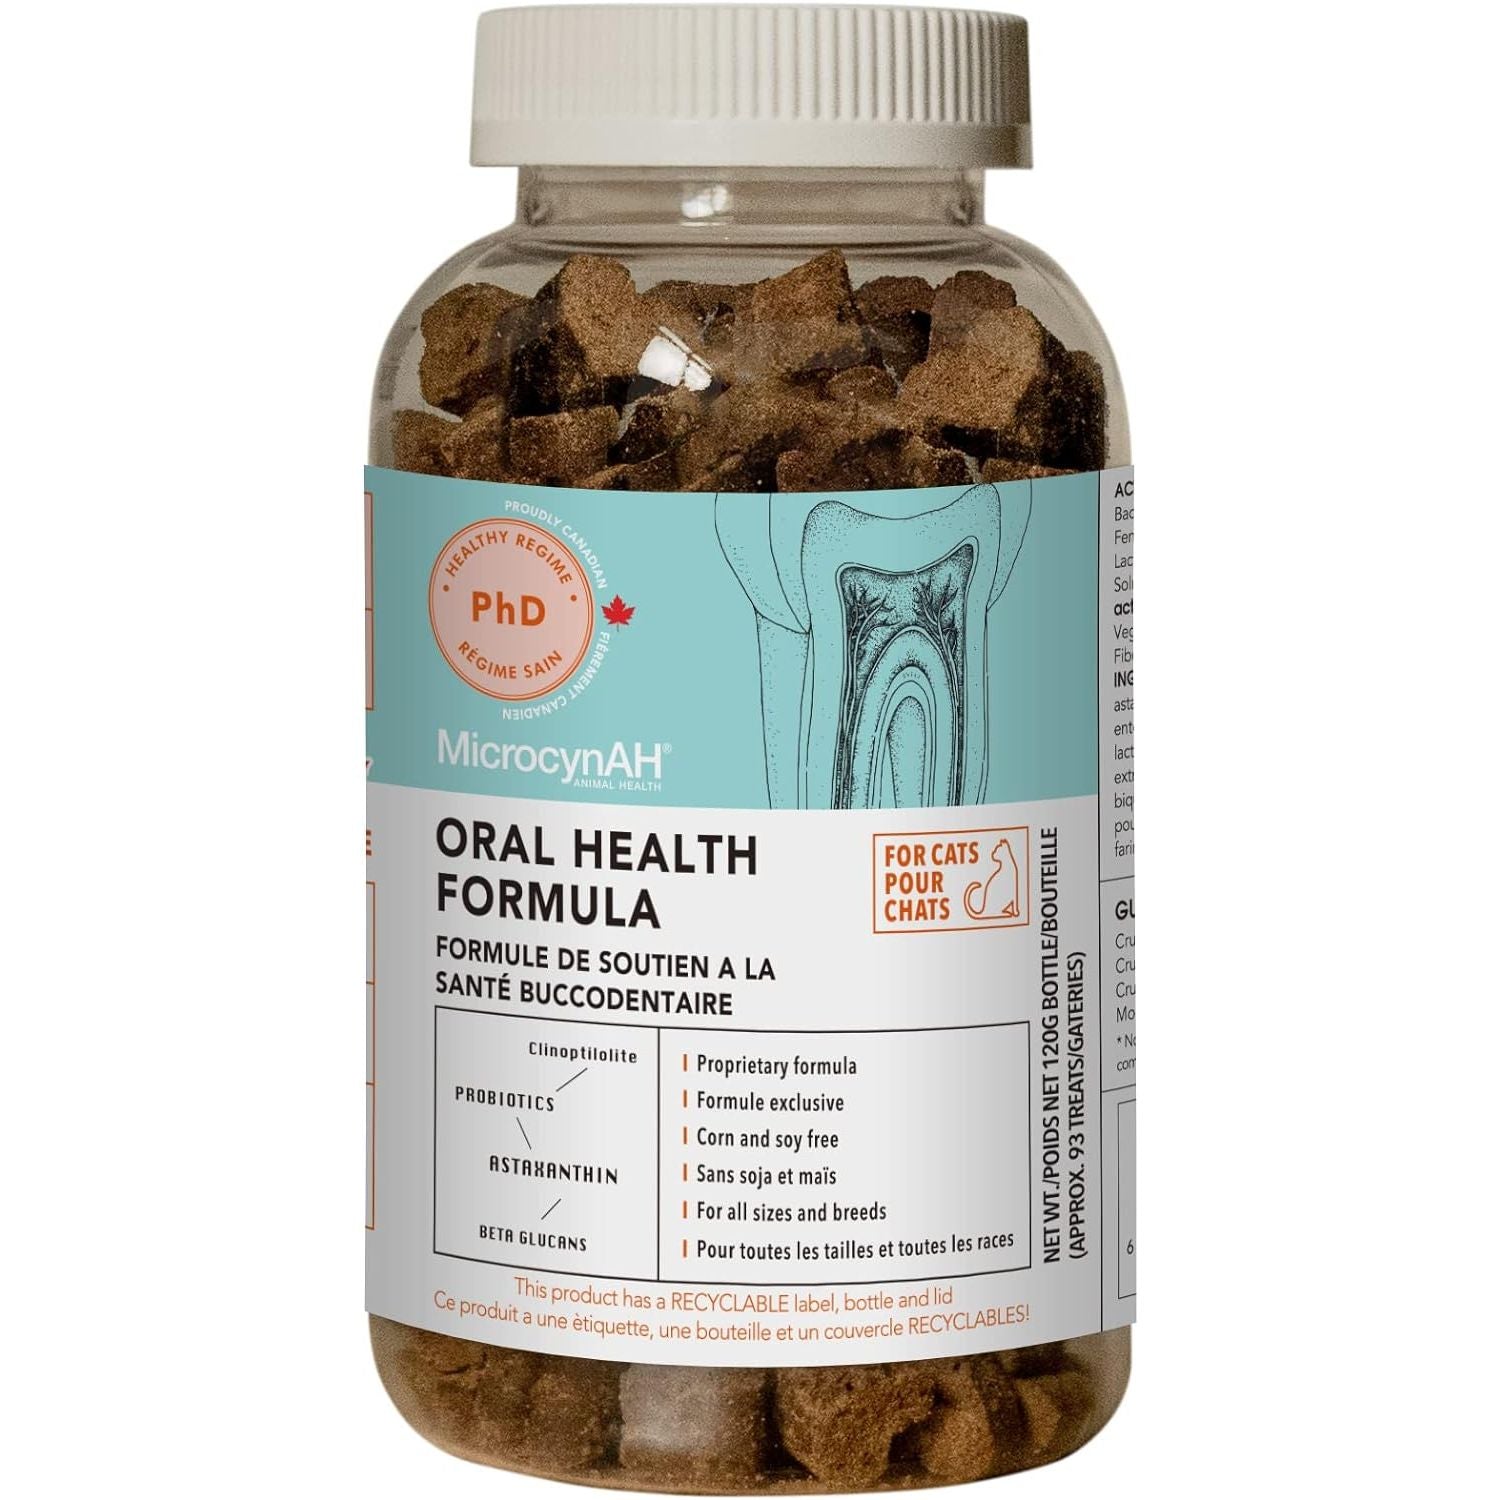 MicrocynAH - Oral Health Formula for Cats